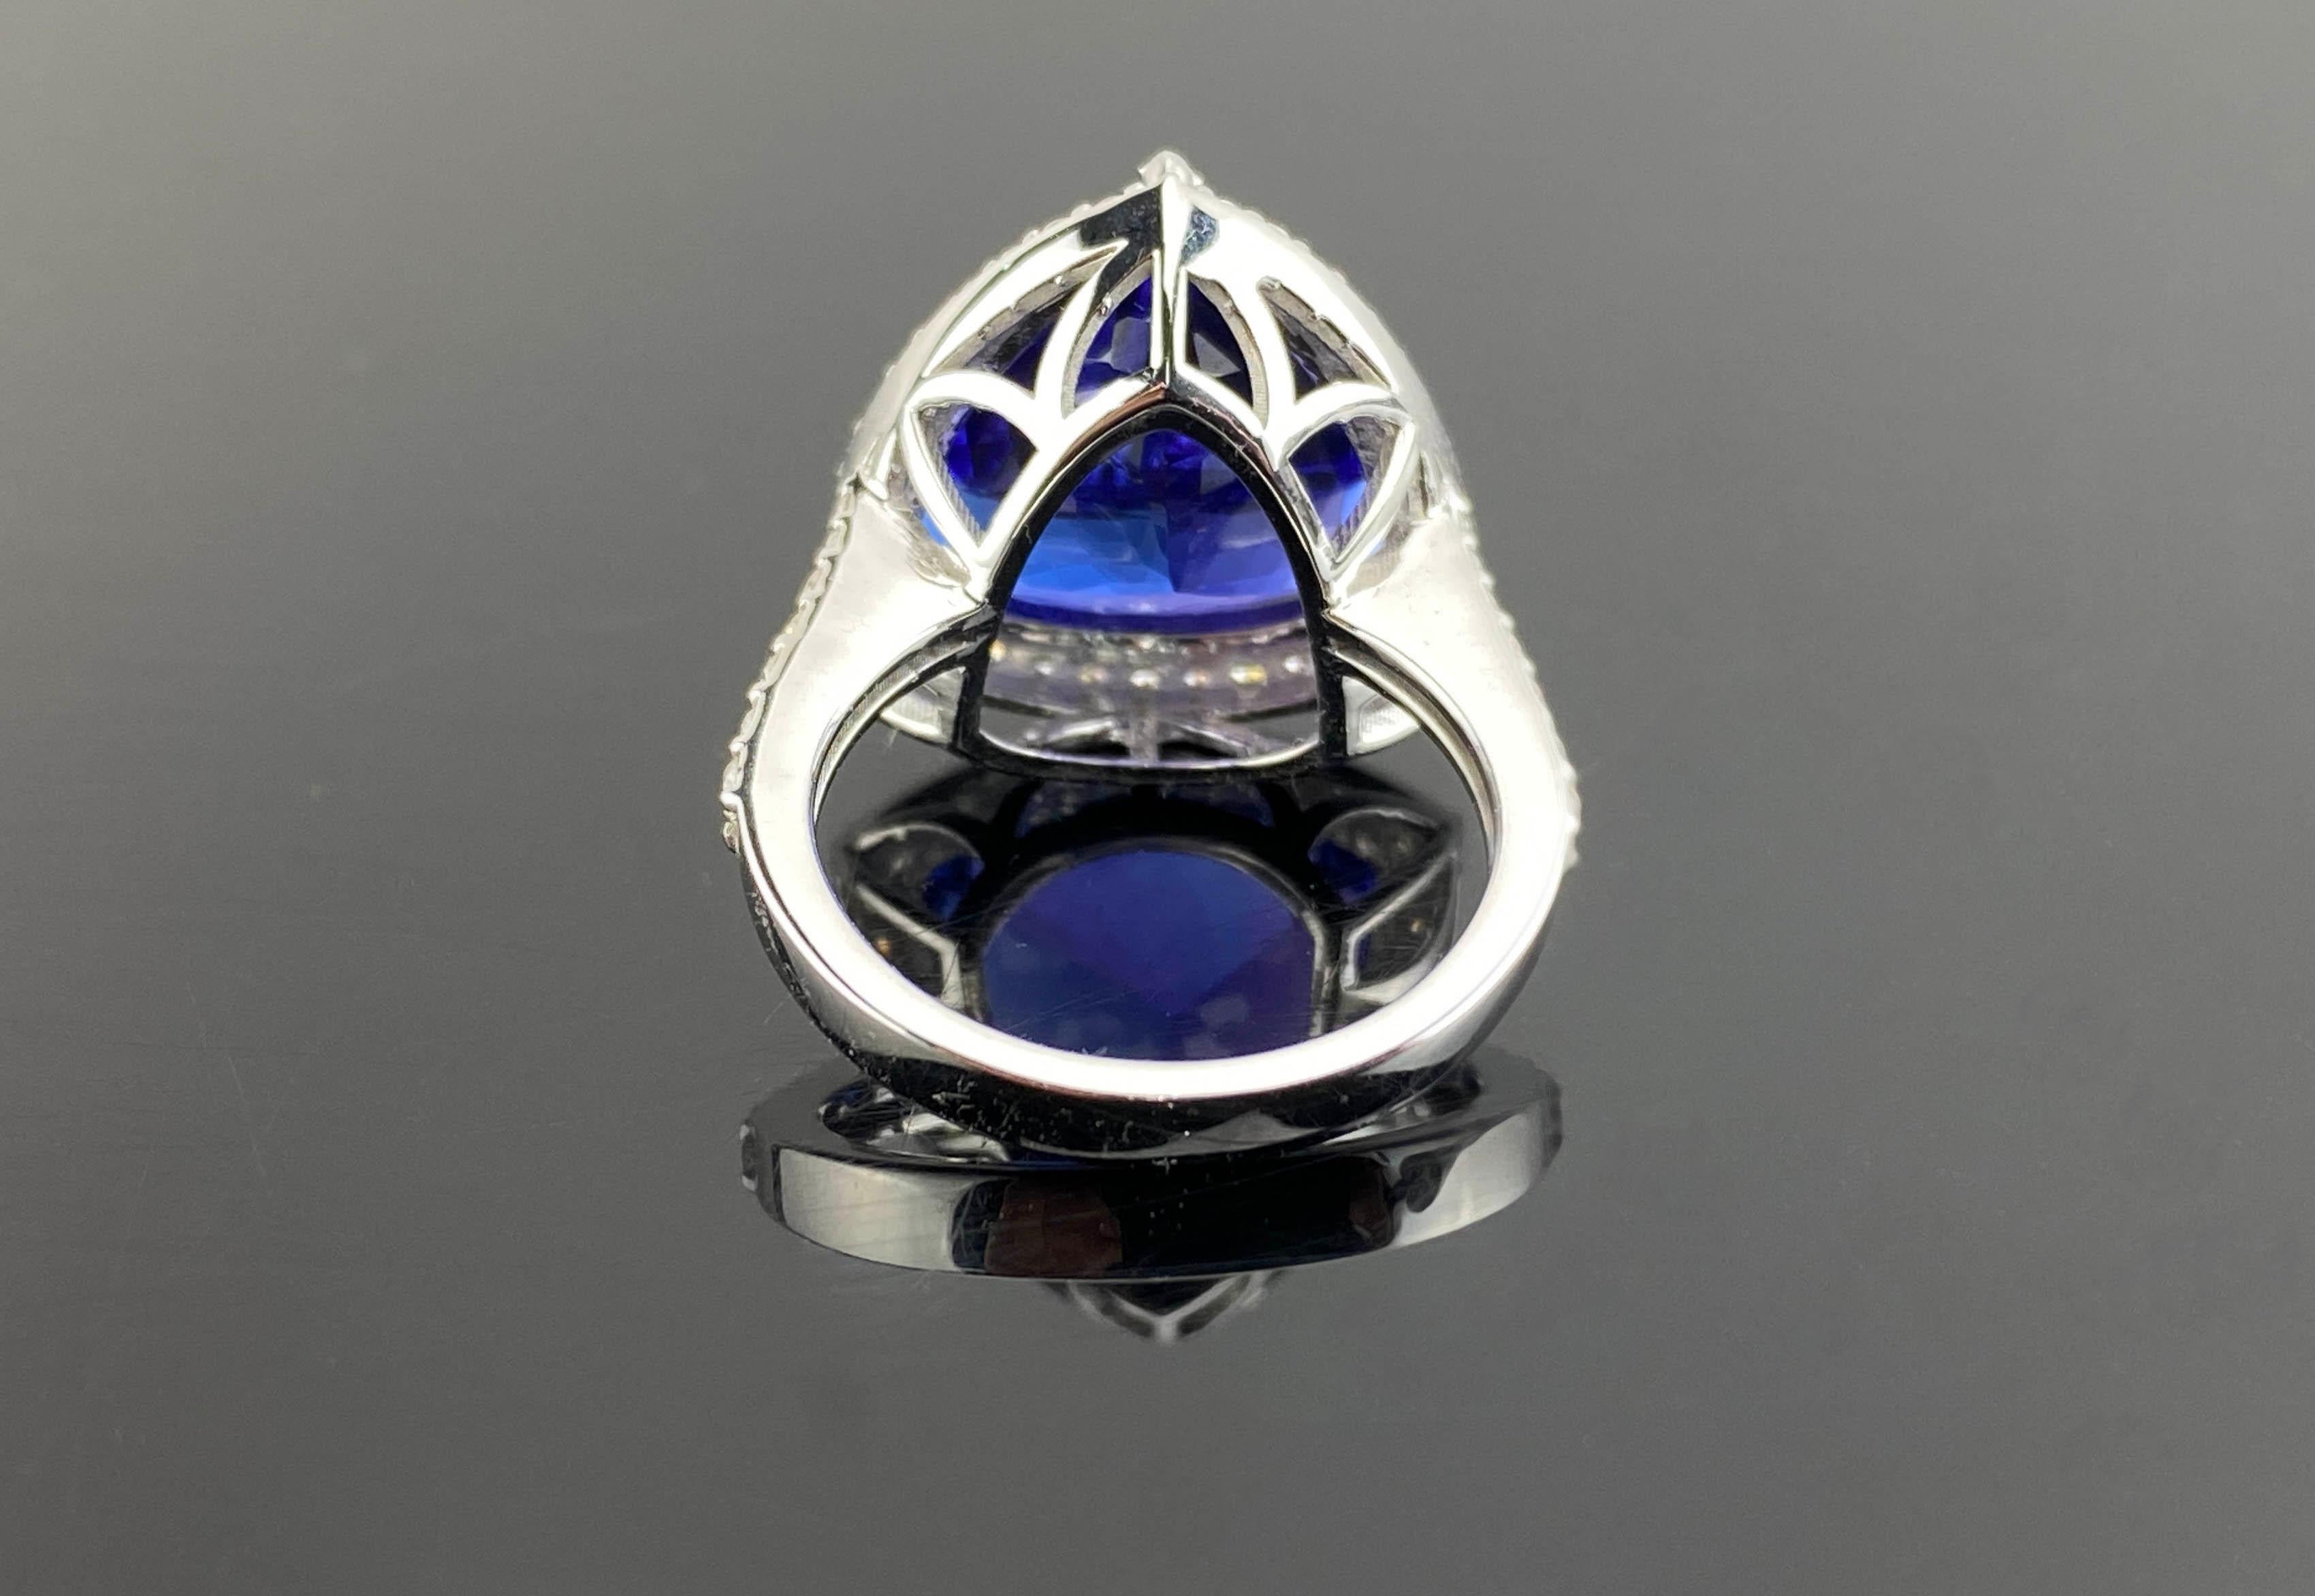 12.54 Carat Trillion Cut Tanzanite and Diamond Cocktail Ring Set in White Gold For Sale 7